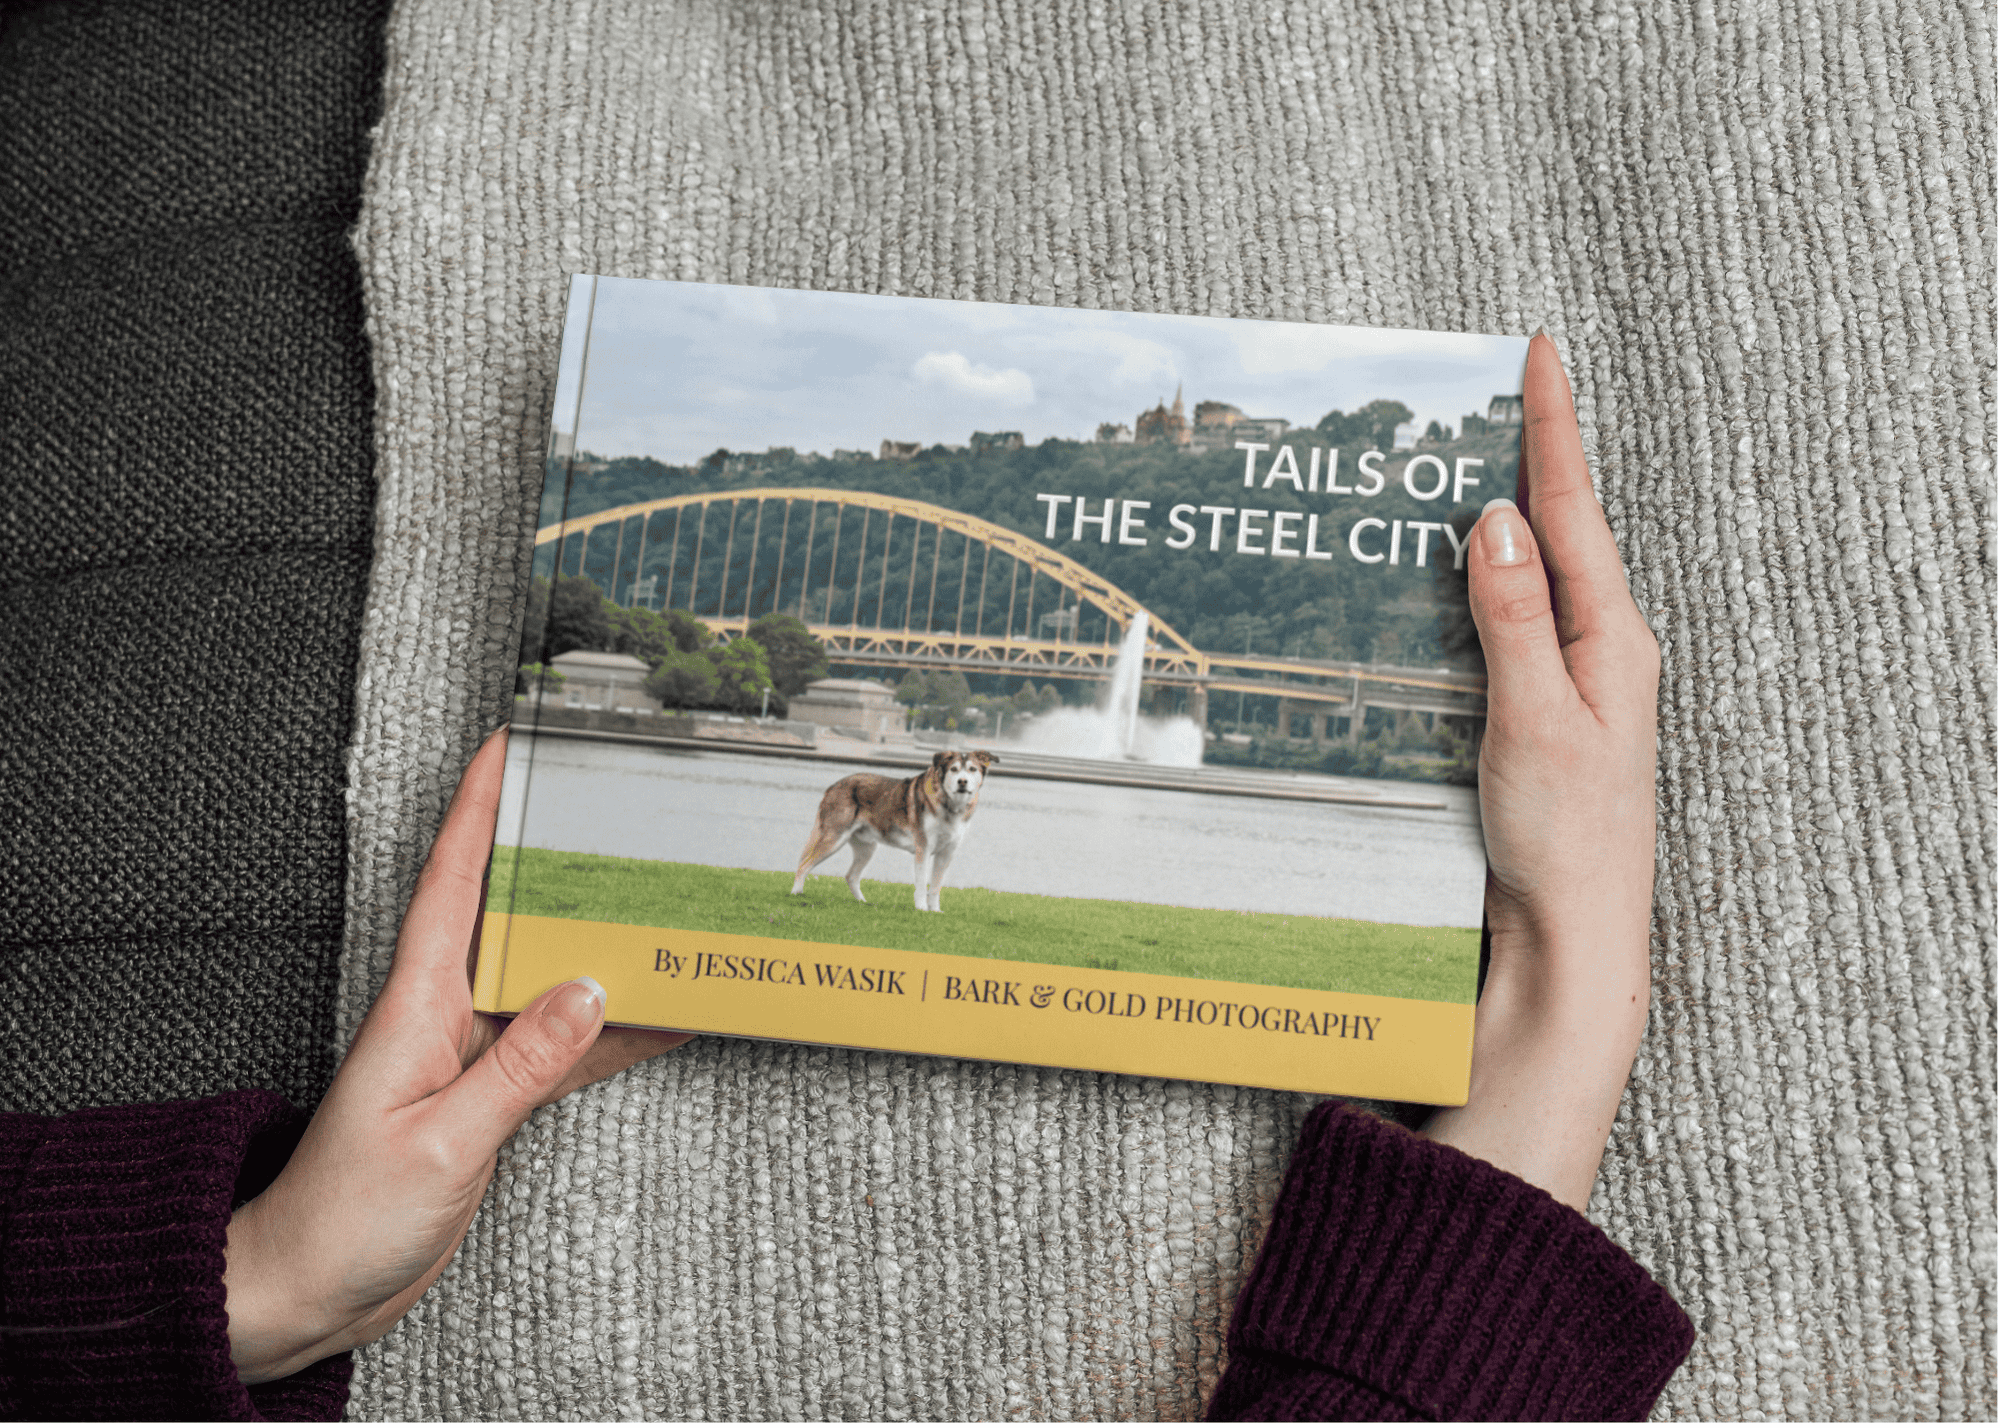 tails-of-the-steel-city-book-hands